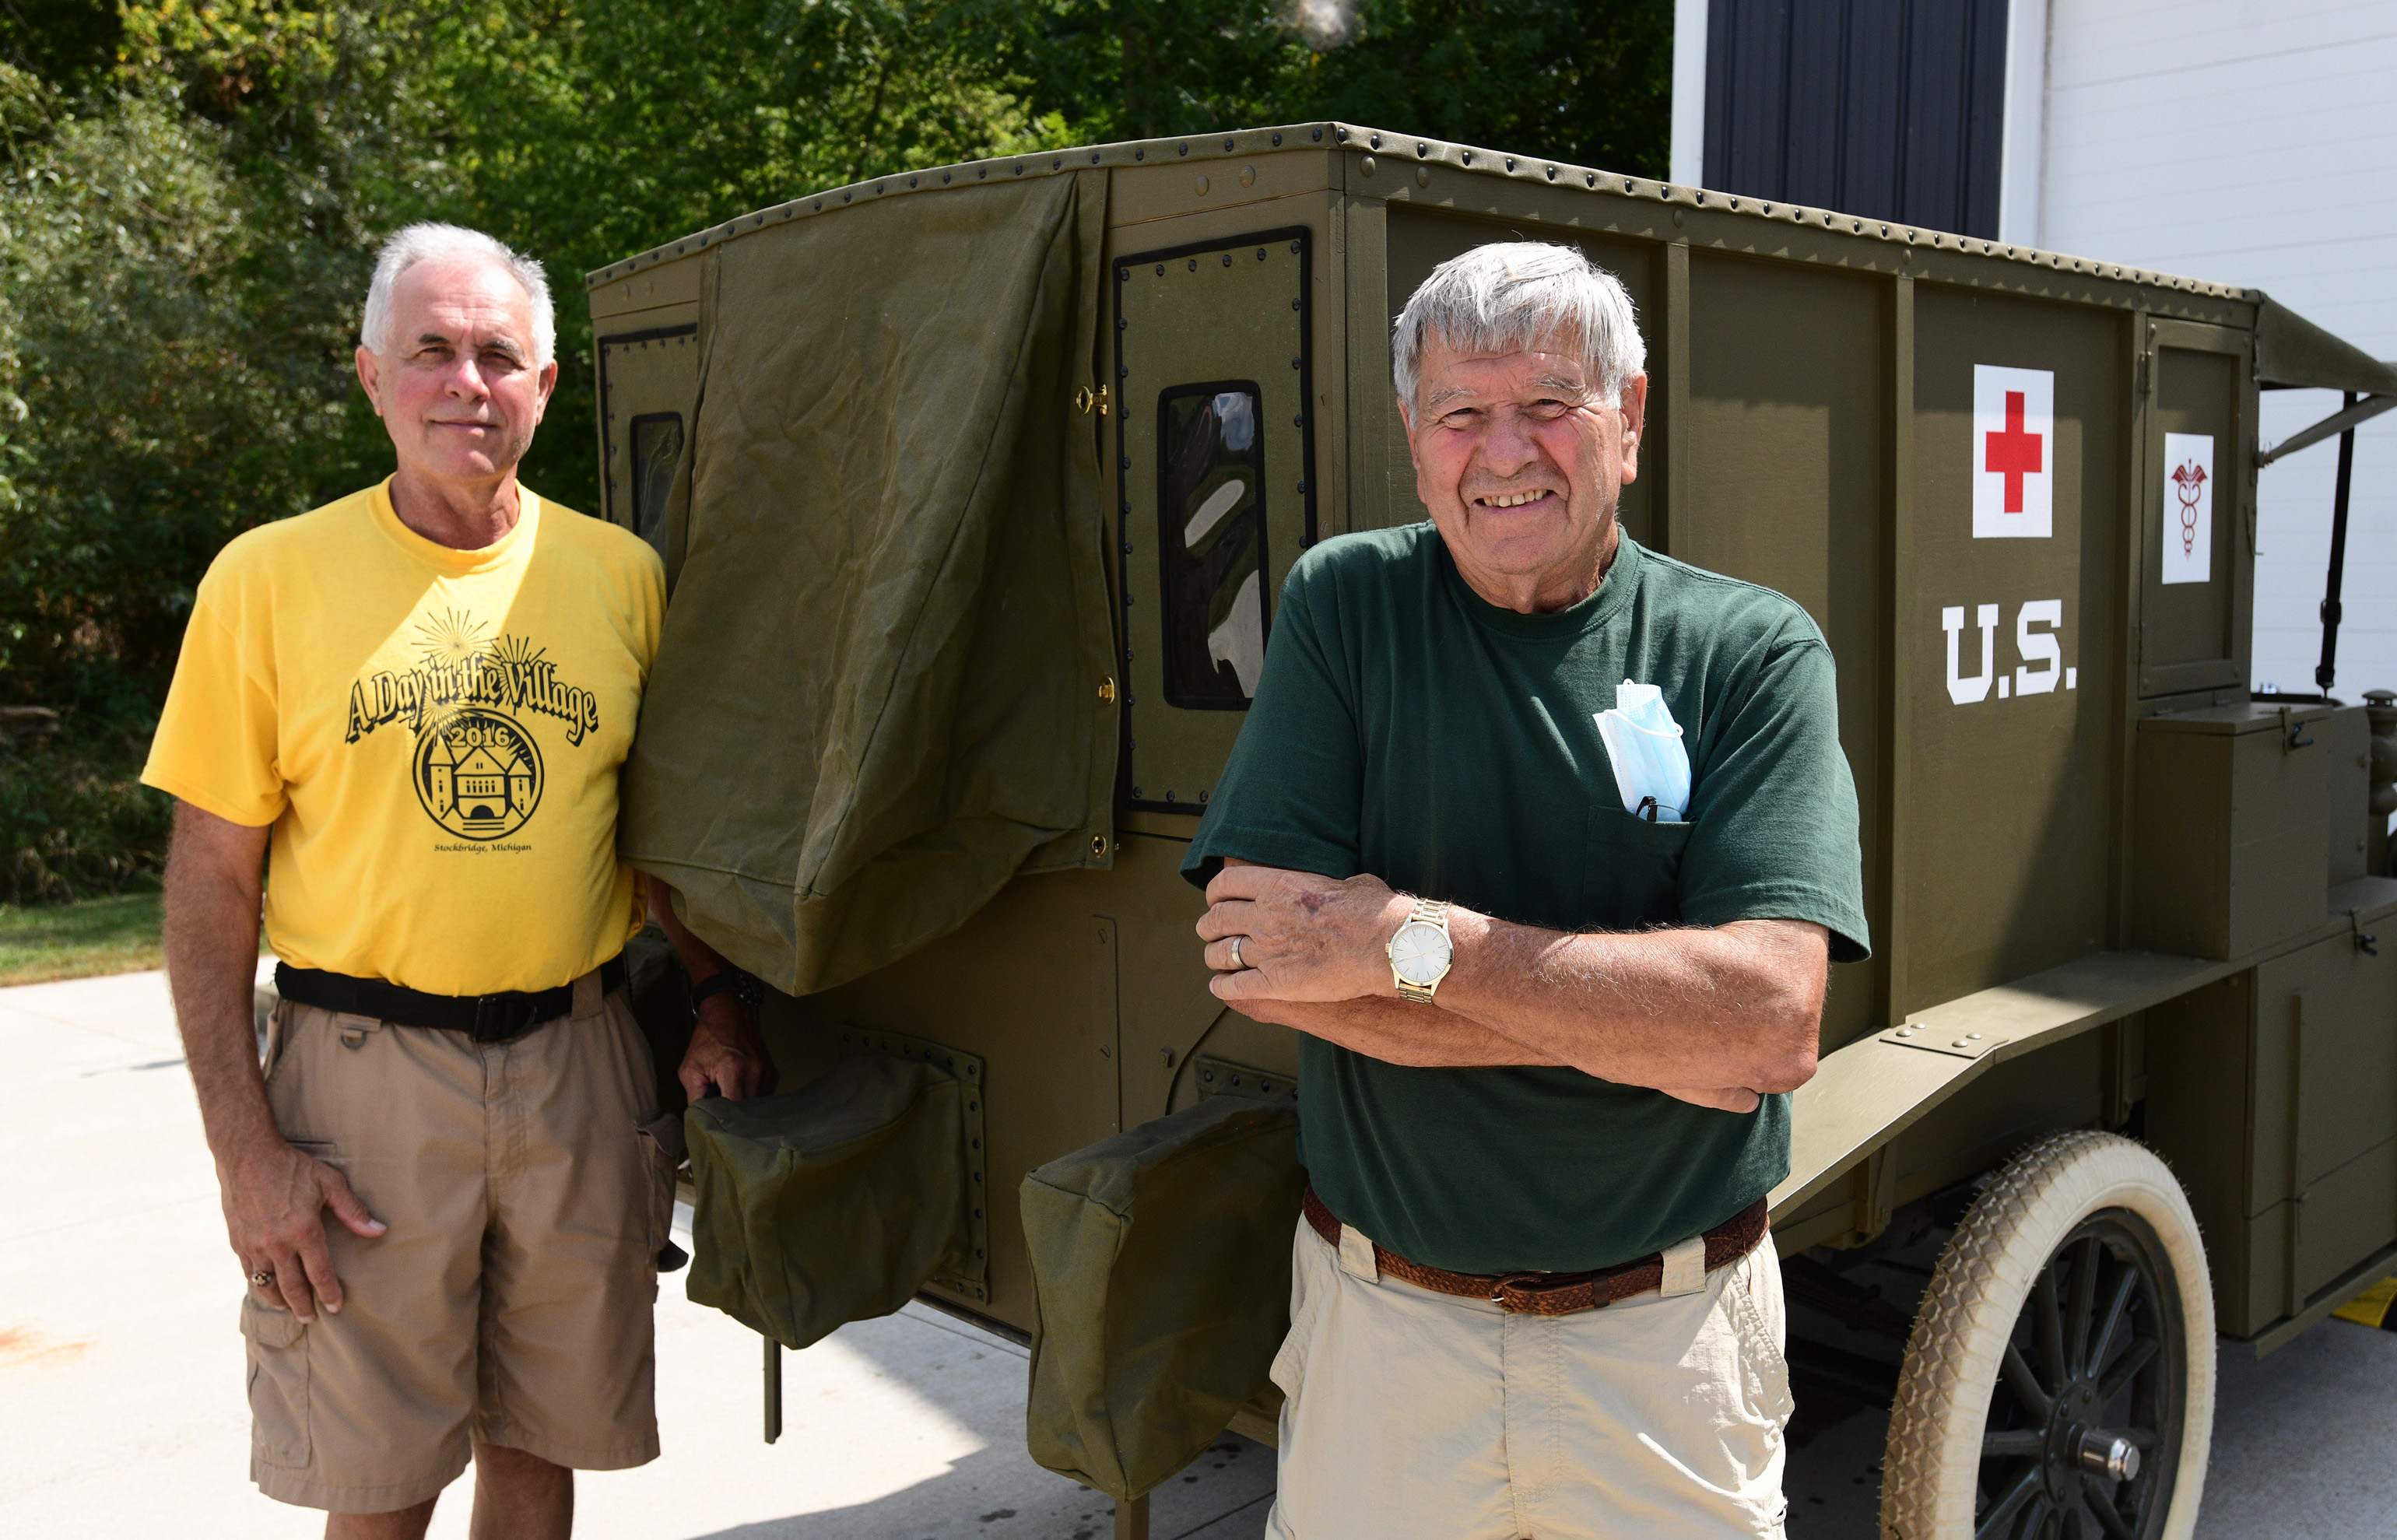 Volunteers Mike Coppernoll, right, and Richard Lambert helped the Michigan Military Heritage Museum convert a 1917 Ford Model T to a World War I era ambulance. The ambulance was on display at the Grass Lake museum on Thursday, Aug. 27, 2020. It took three years for the restoration to complete.